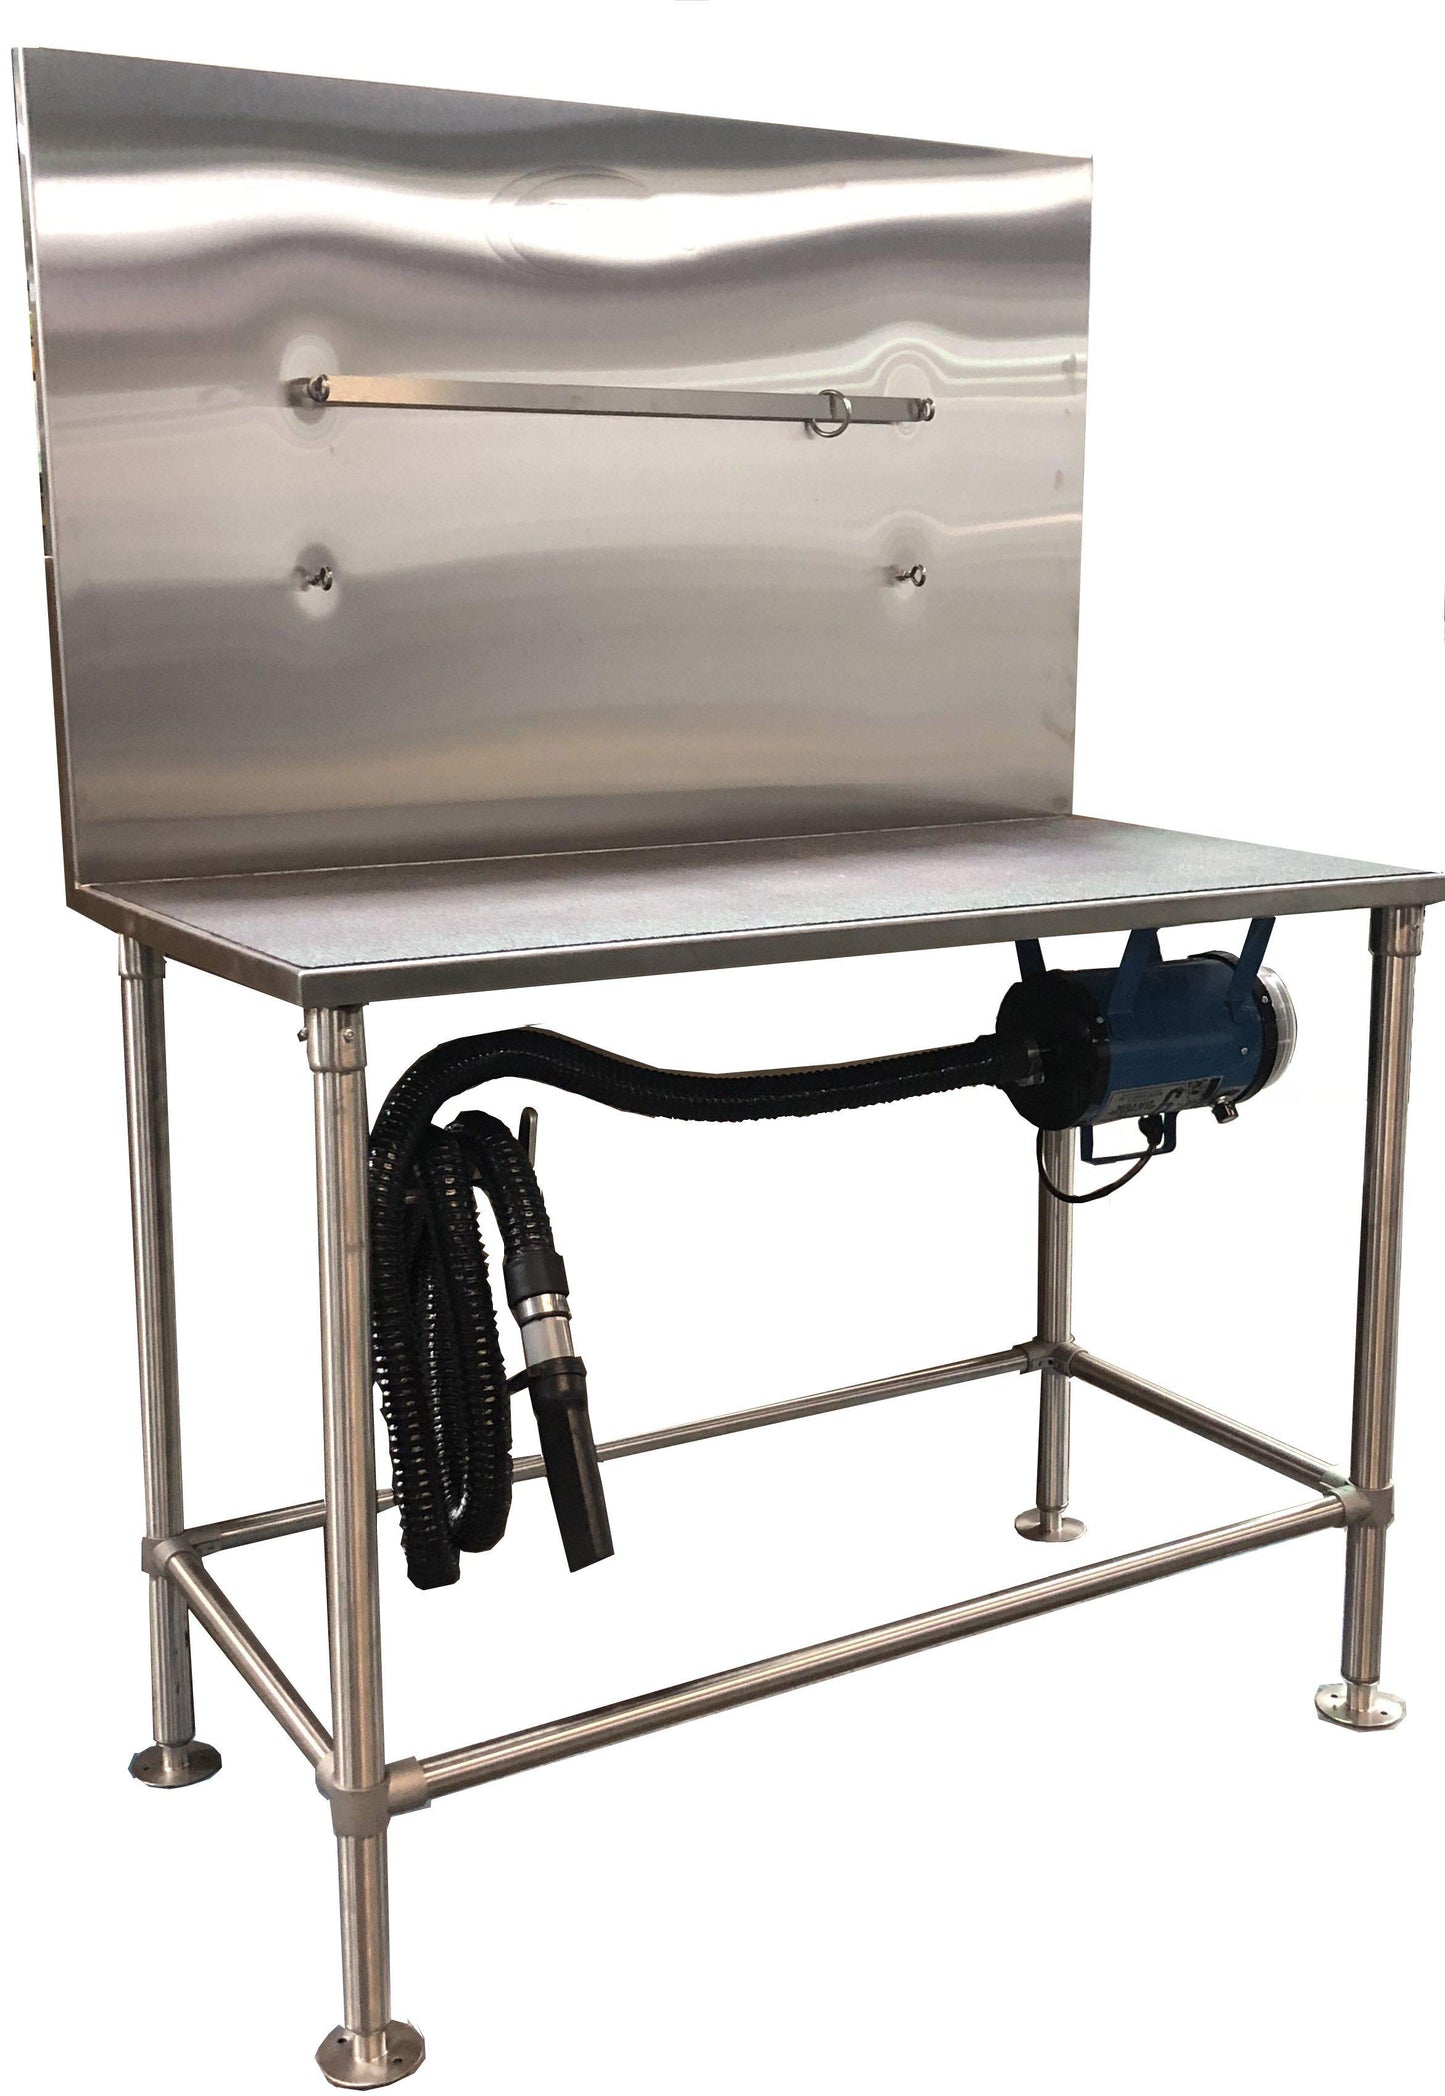 Stainless Steel Drying Table with optional integrated K-9 II Dog Grooming Dryer-Grooming Tables-Pet's Choice Supply